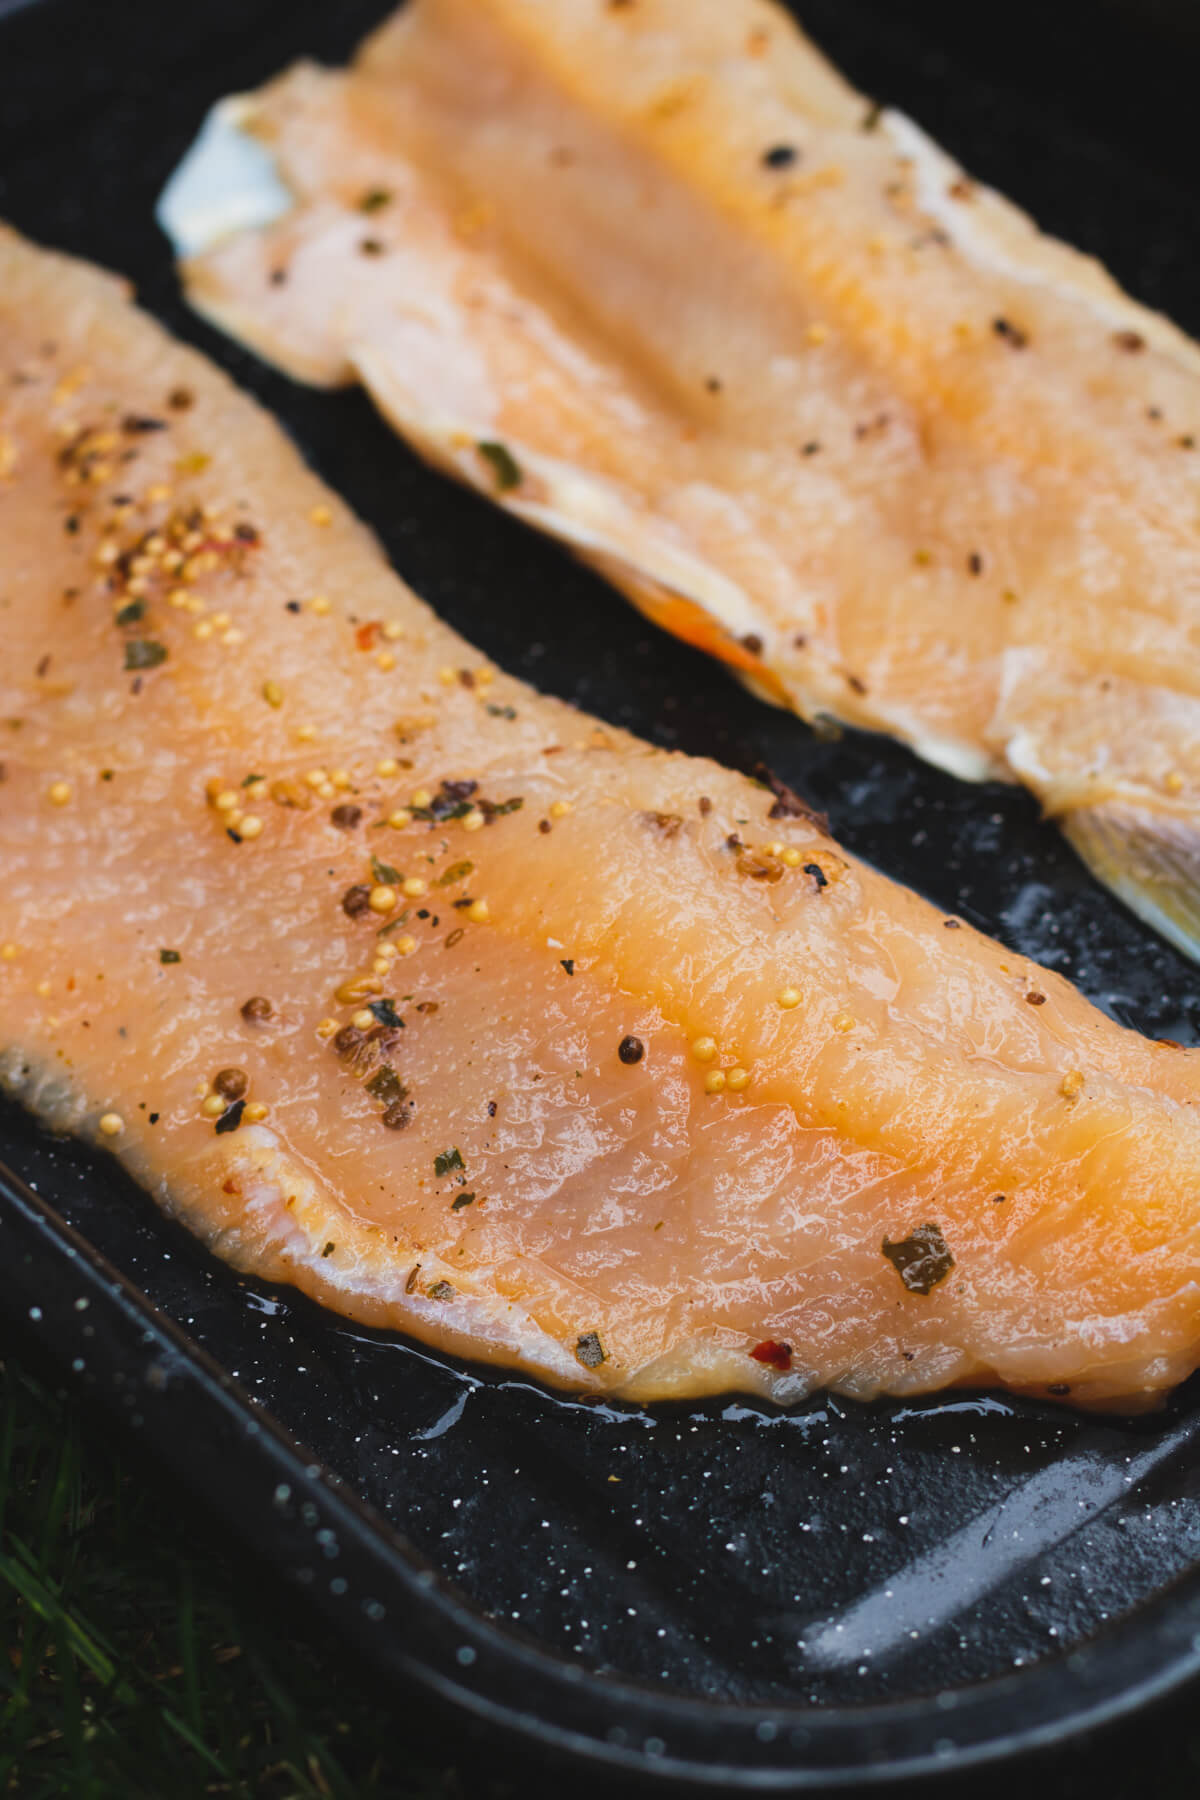 A black enamel tray containing two brined trout filets ready for the smoker.